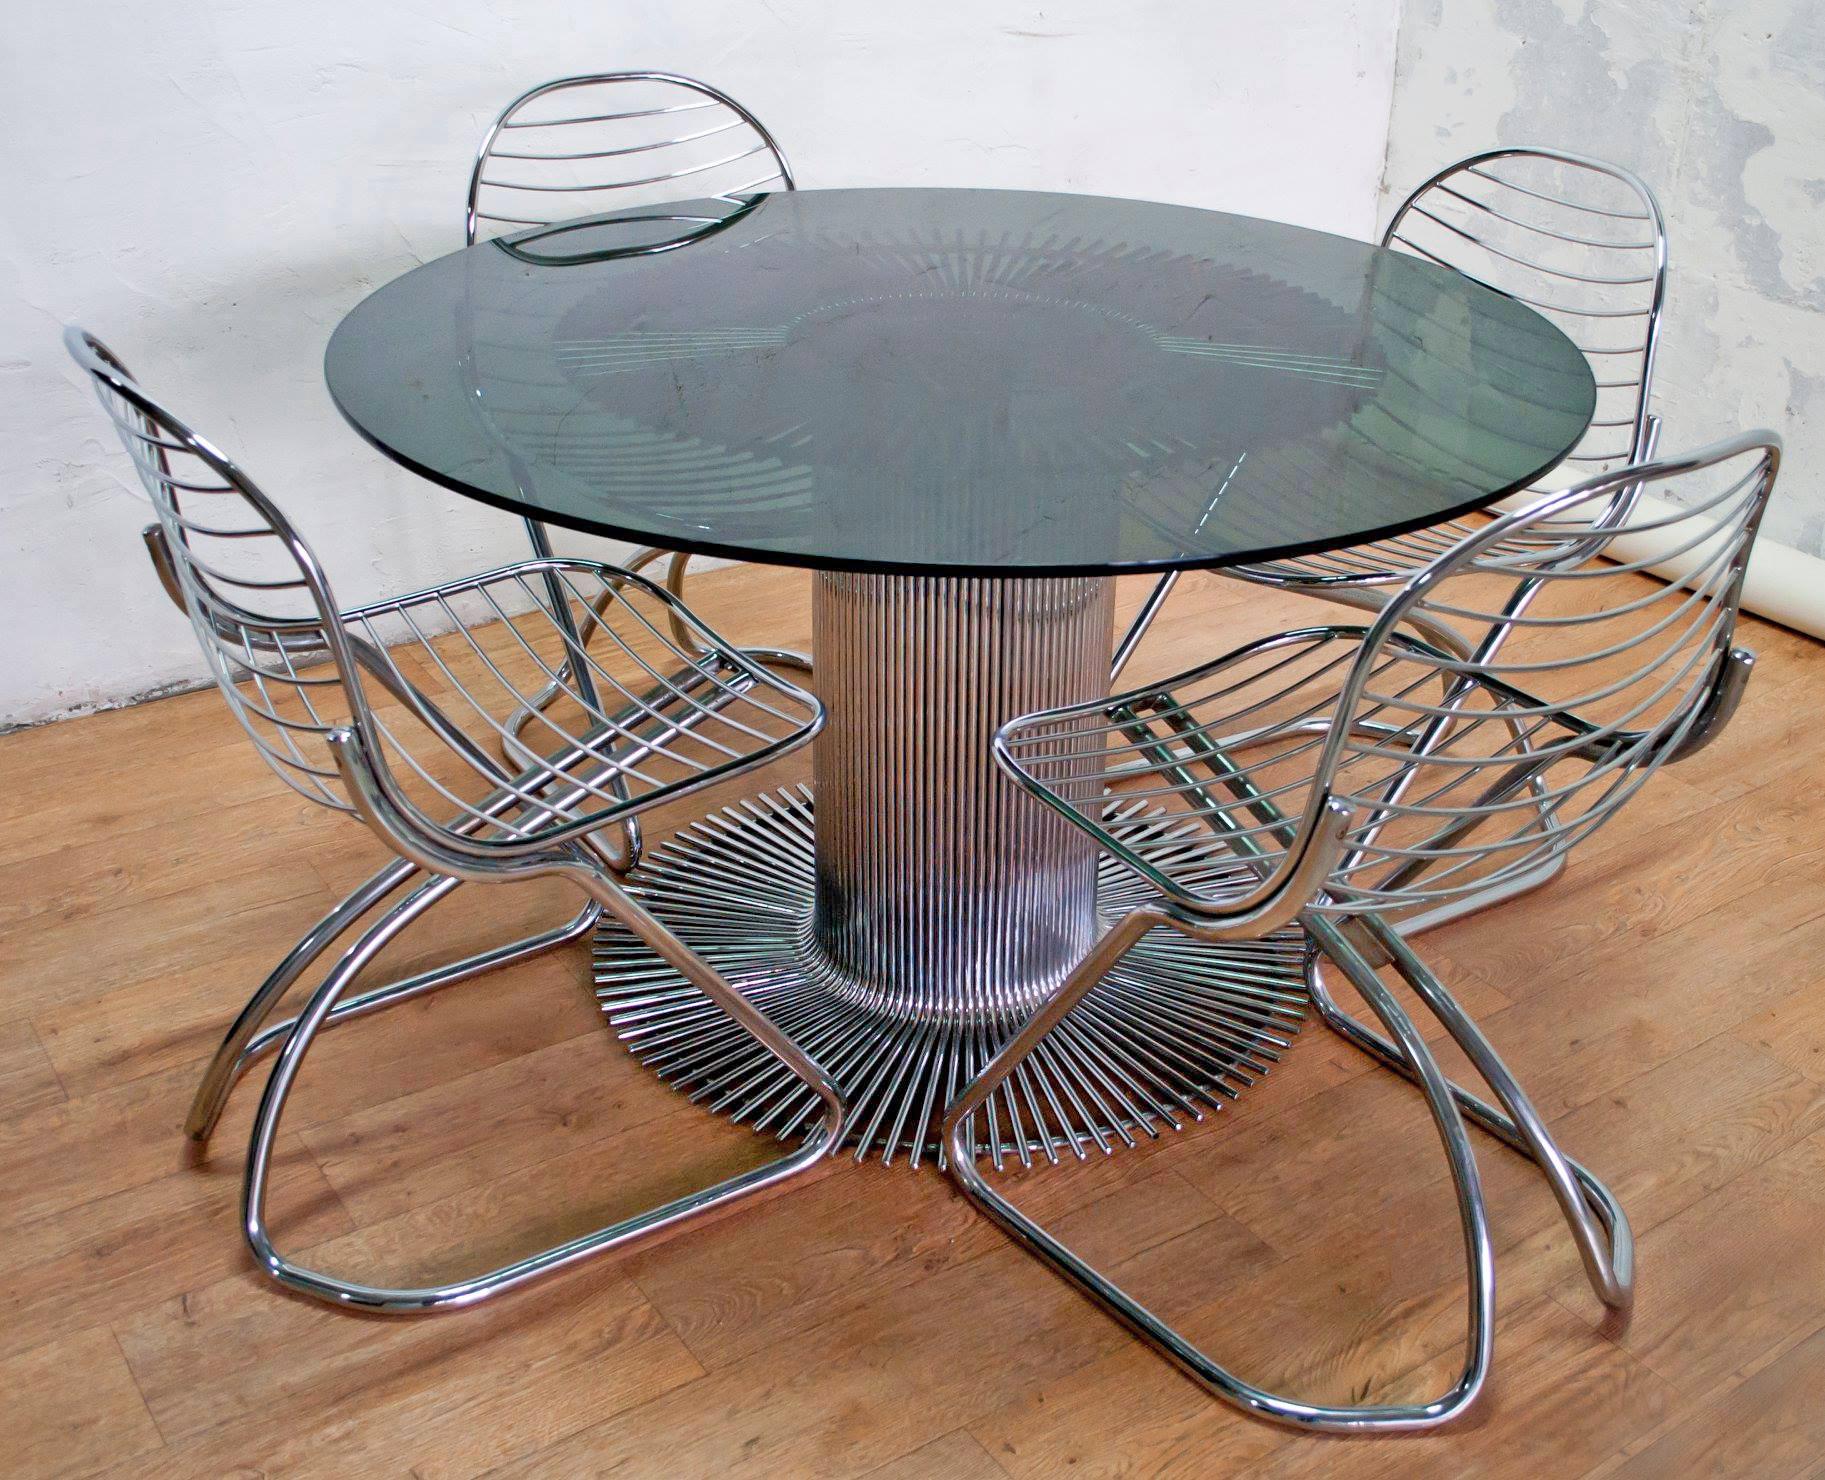 This dining set was designed by Gastone Rinaldi for Rima in the 1970s, and consists of a table in chromed metal with smoked glass, and four chairs in chromed metal.

The Italian designer Gastone Rinaldi was born in Italy, in Padua, in 1920; his